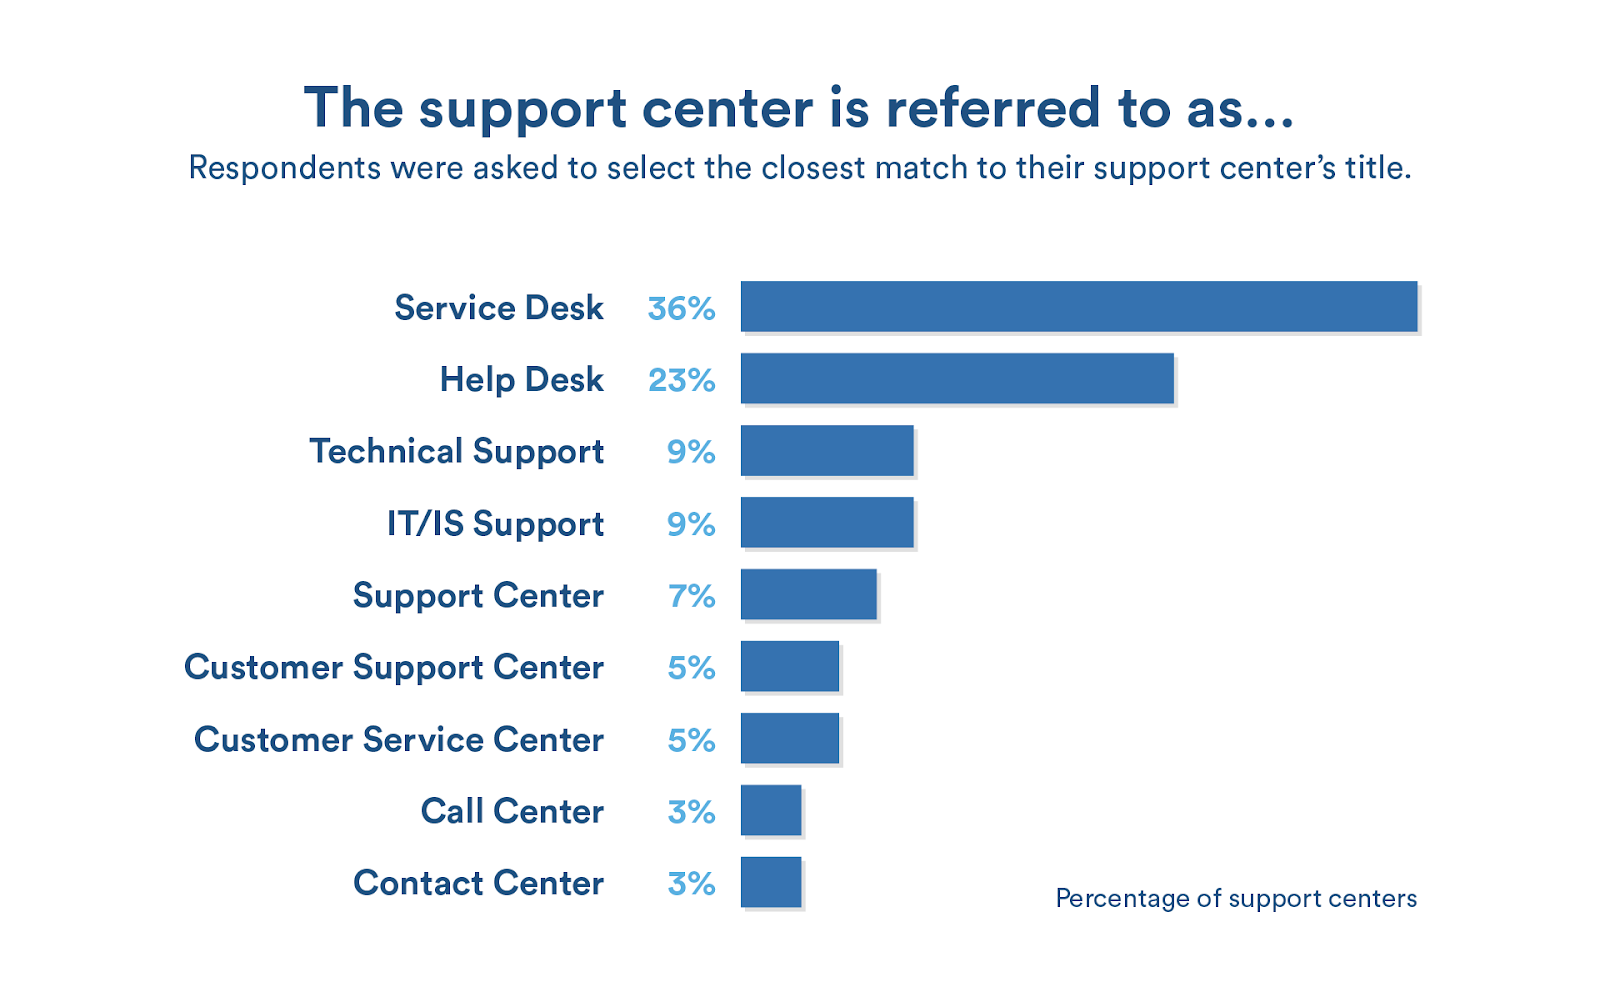 Graph of percentage of support center titles